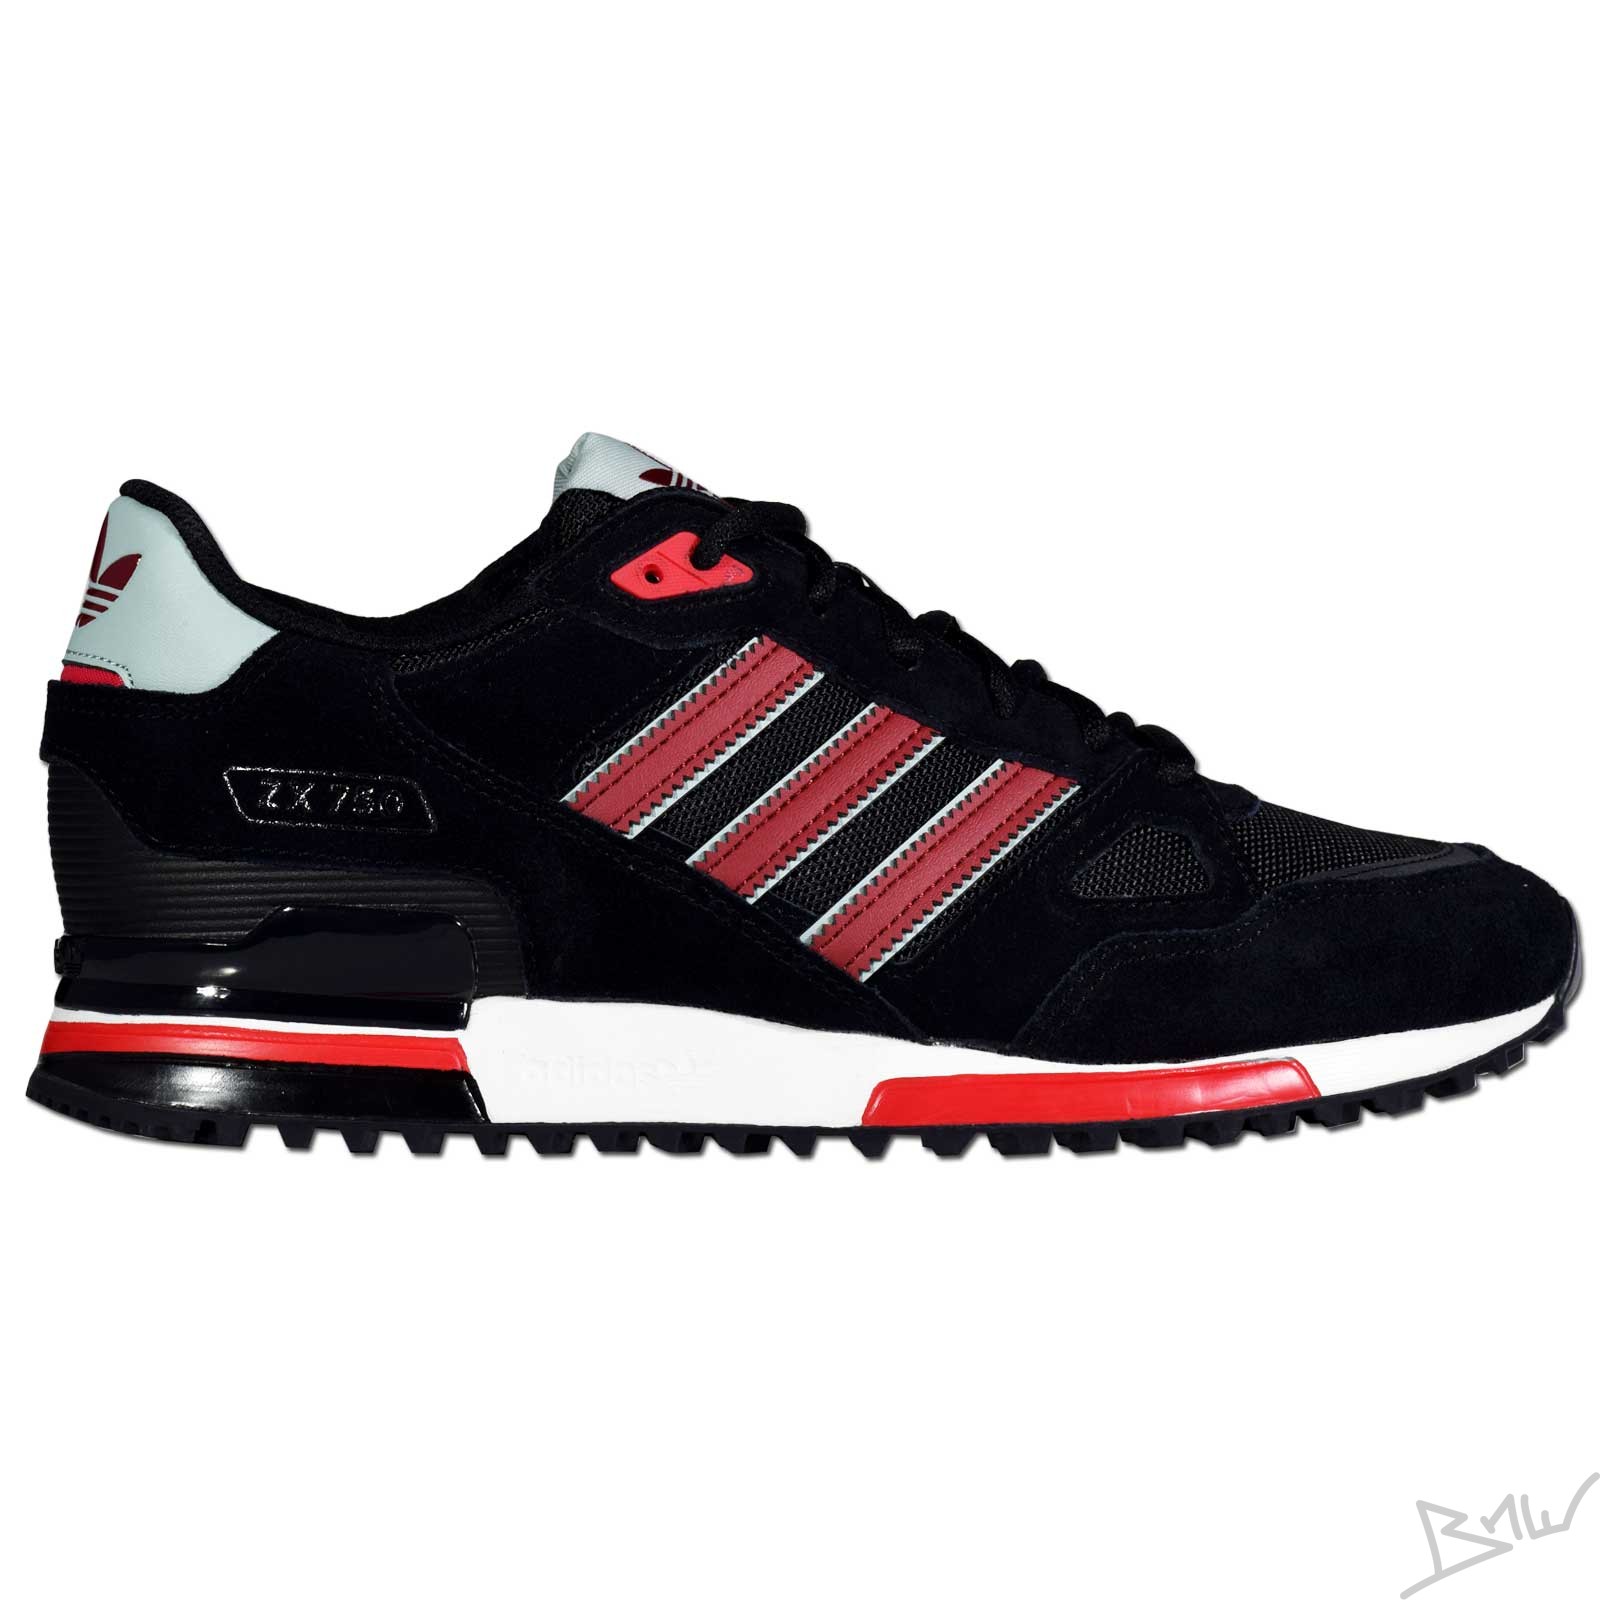 adidas zx 750 rot